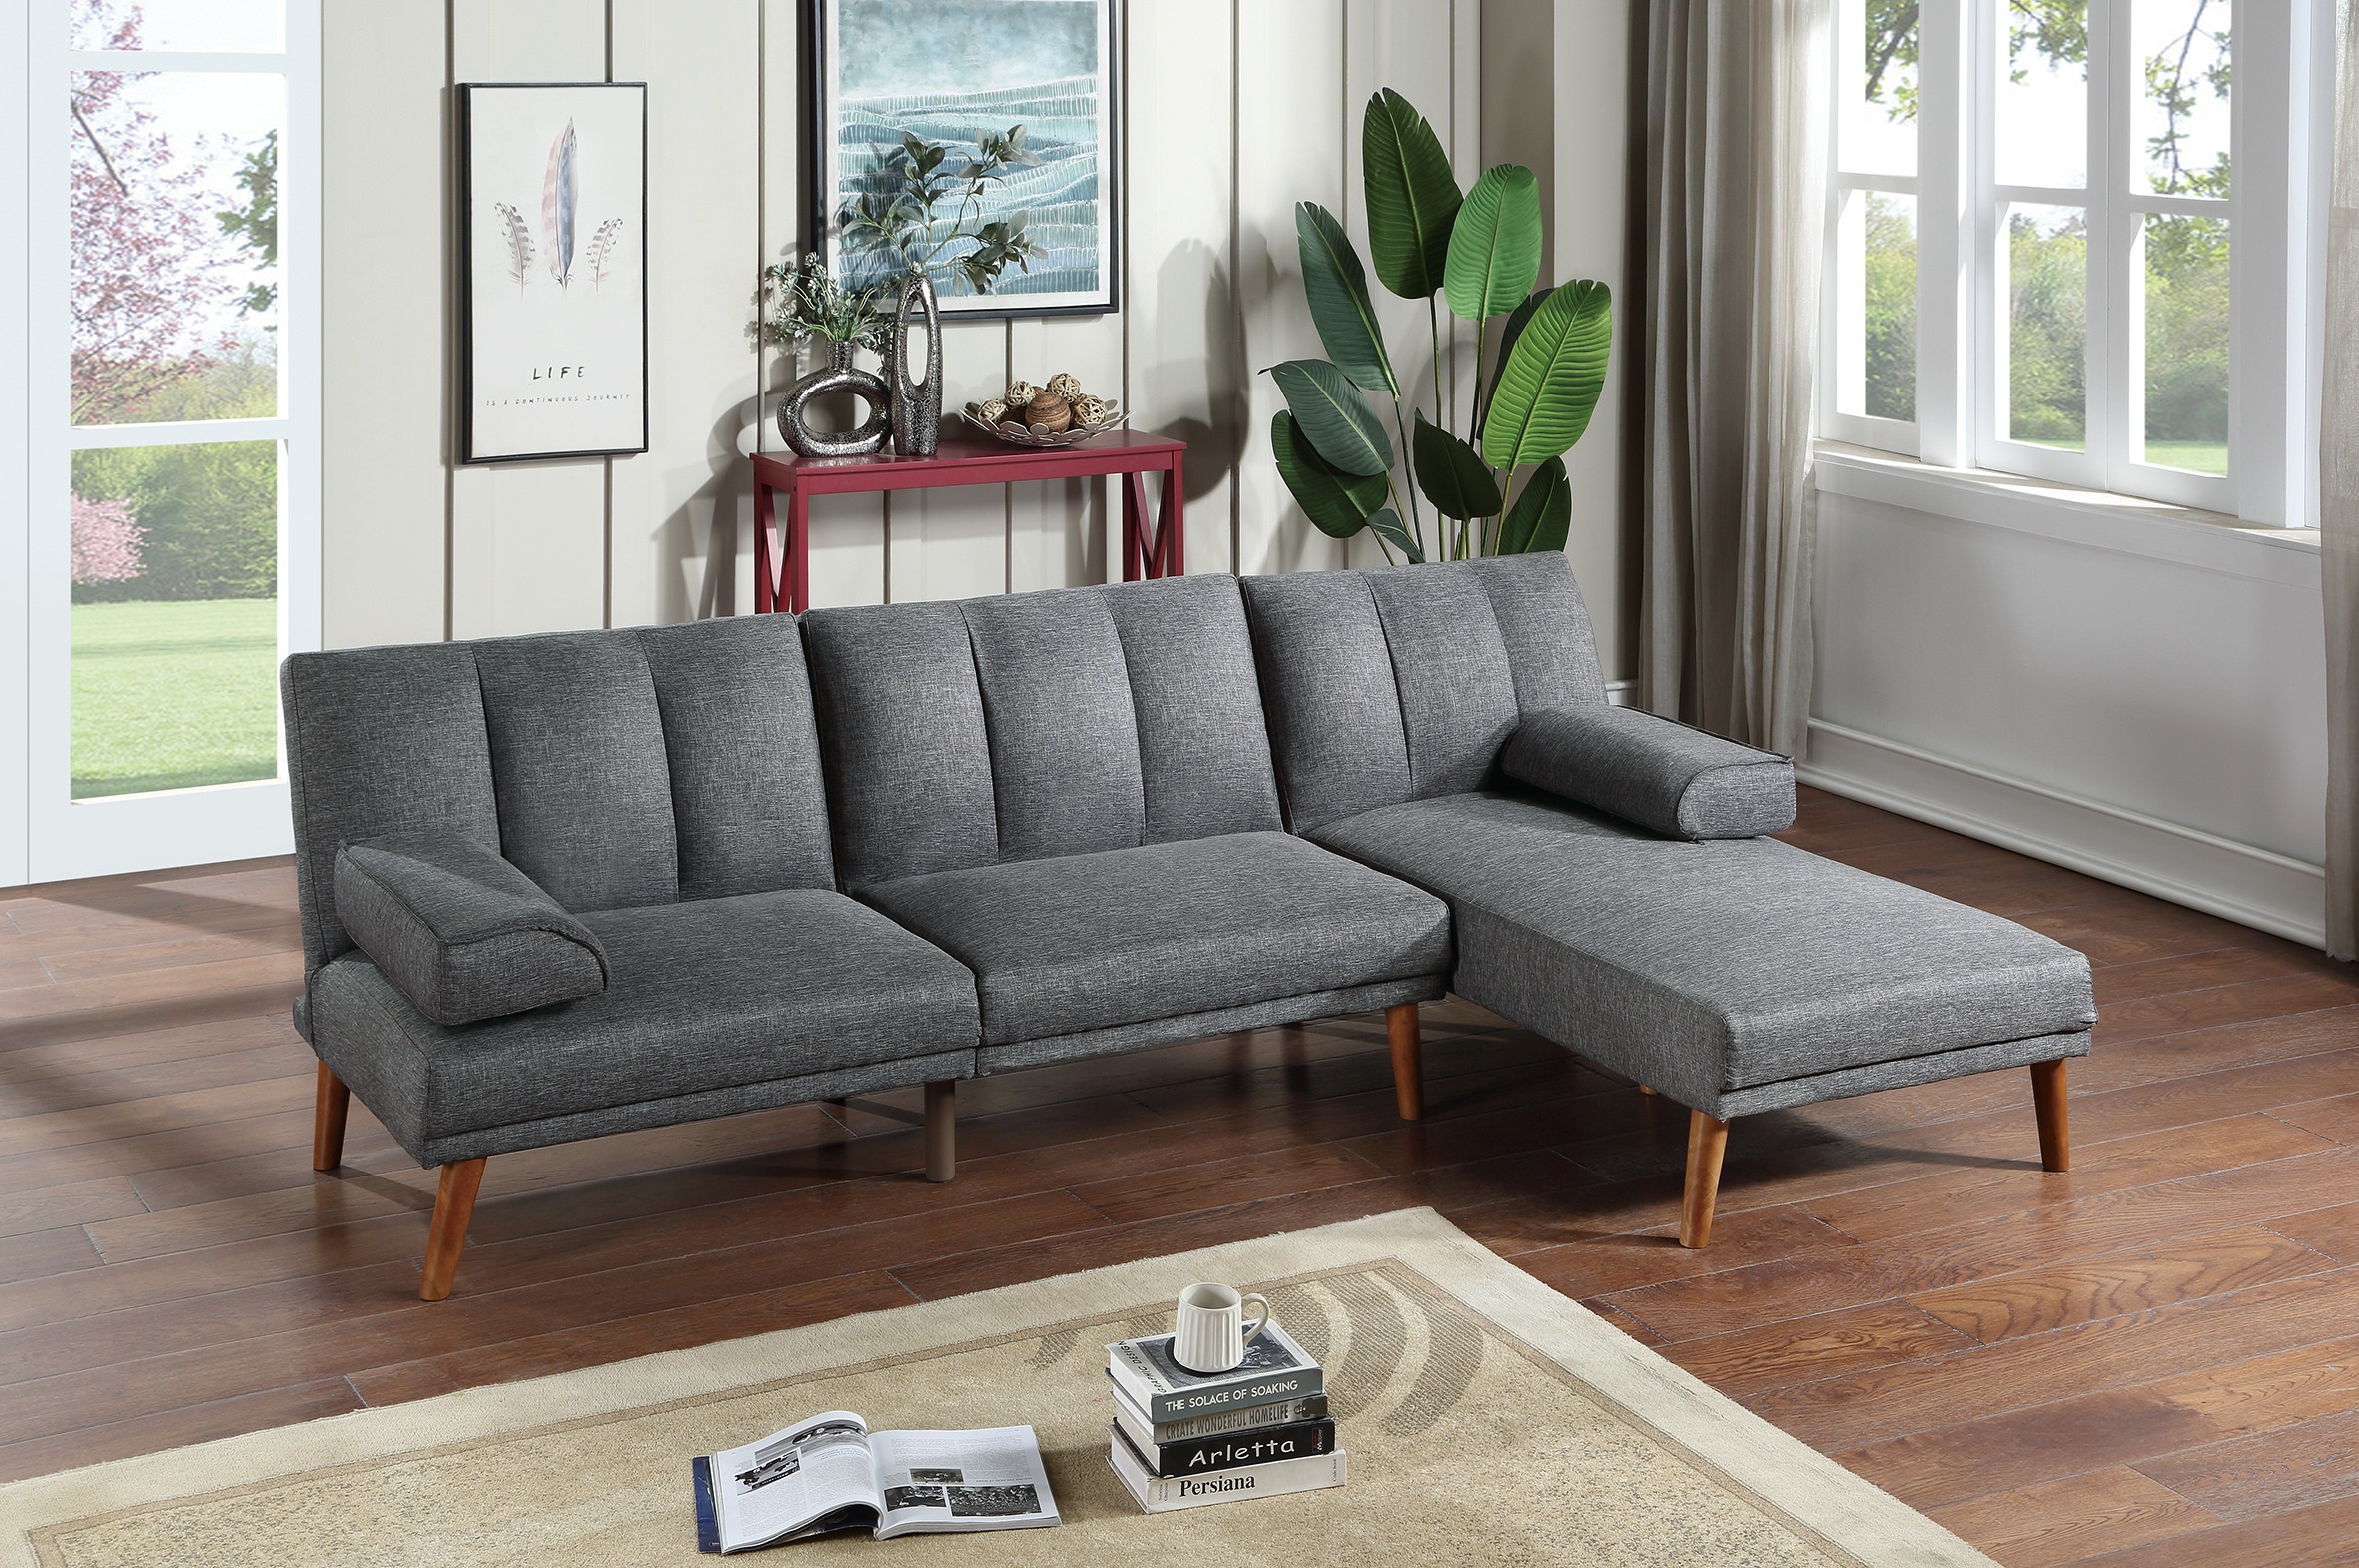 Blue Grey Polyfiber Sectional Sofa Set Living Room Furniture Solid wood Legs Plush Couch Adjustable Sofa Chaise-Boyel Living